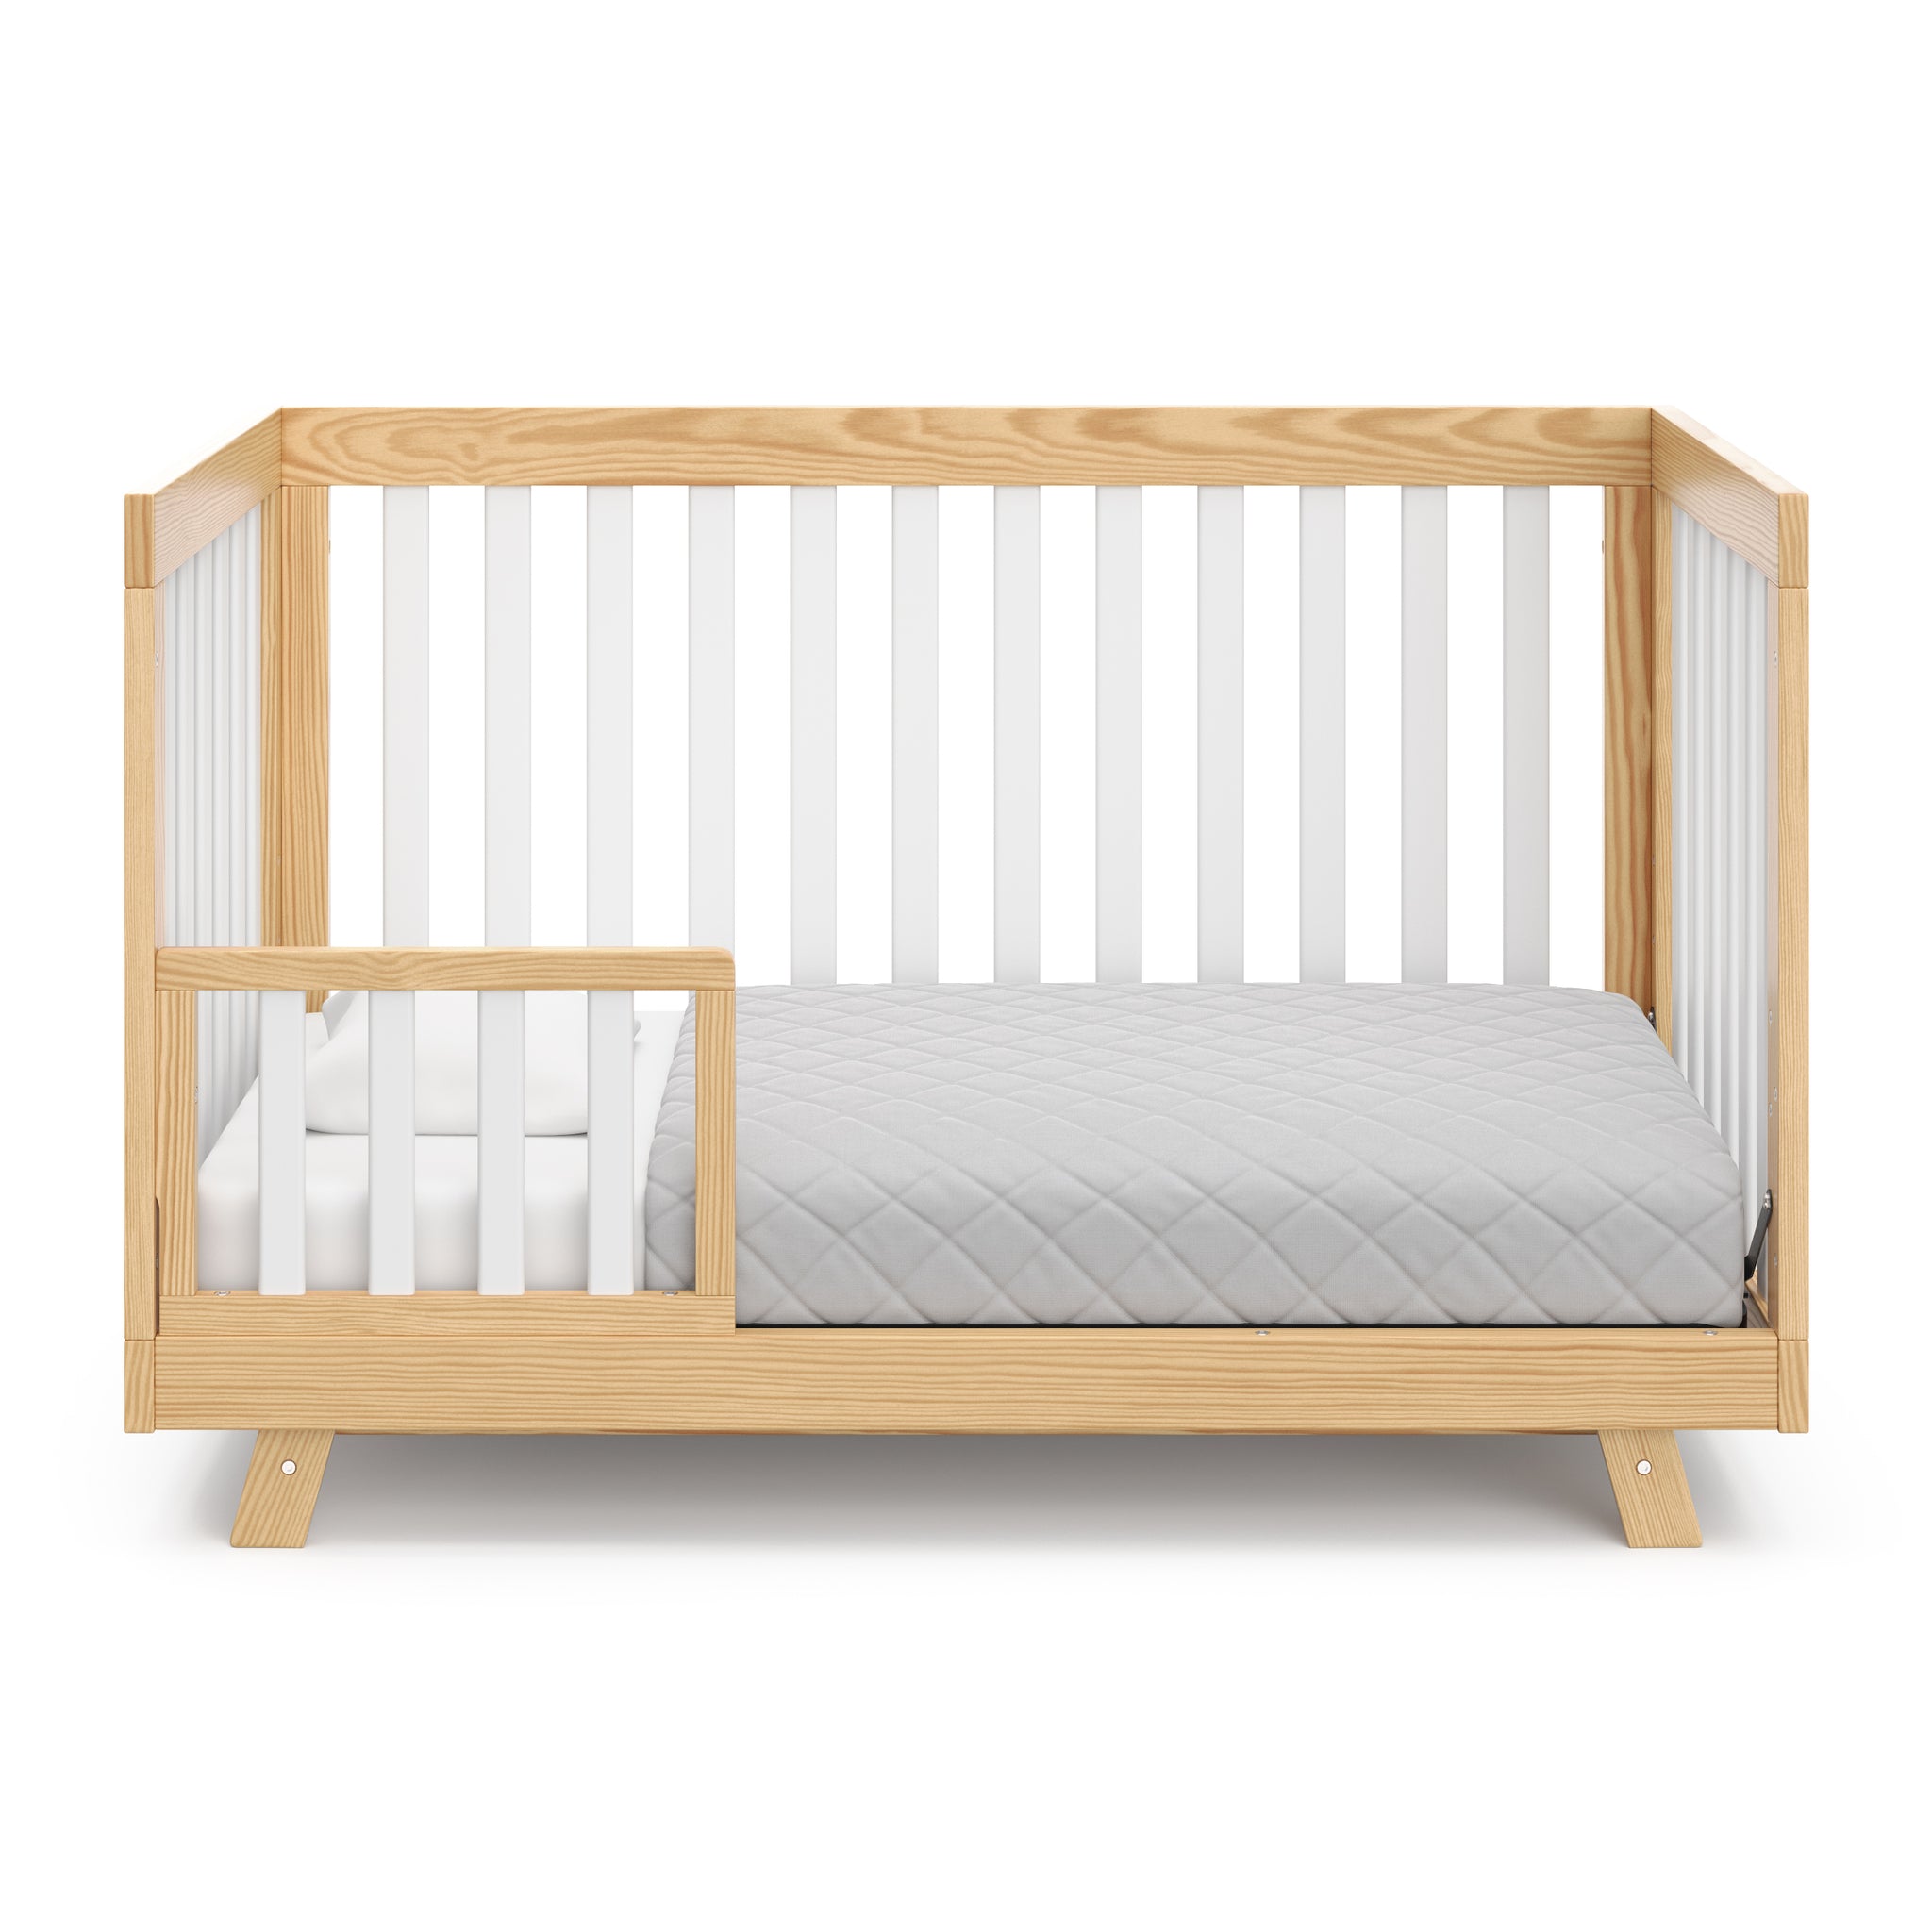 Natural with white crib in toddler bed conversion with one toddler safety guardrail